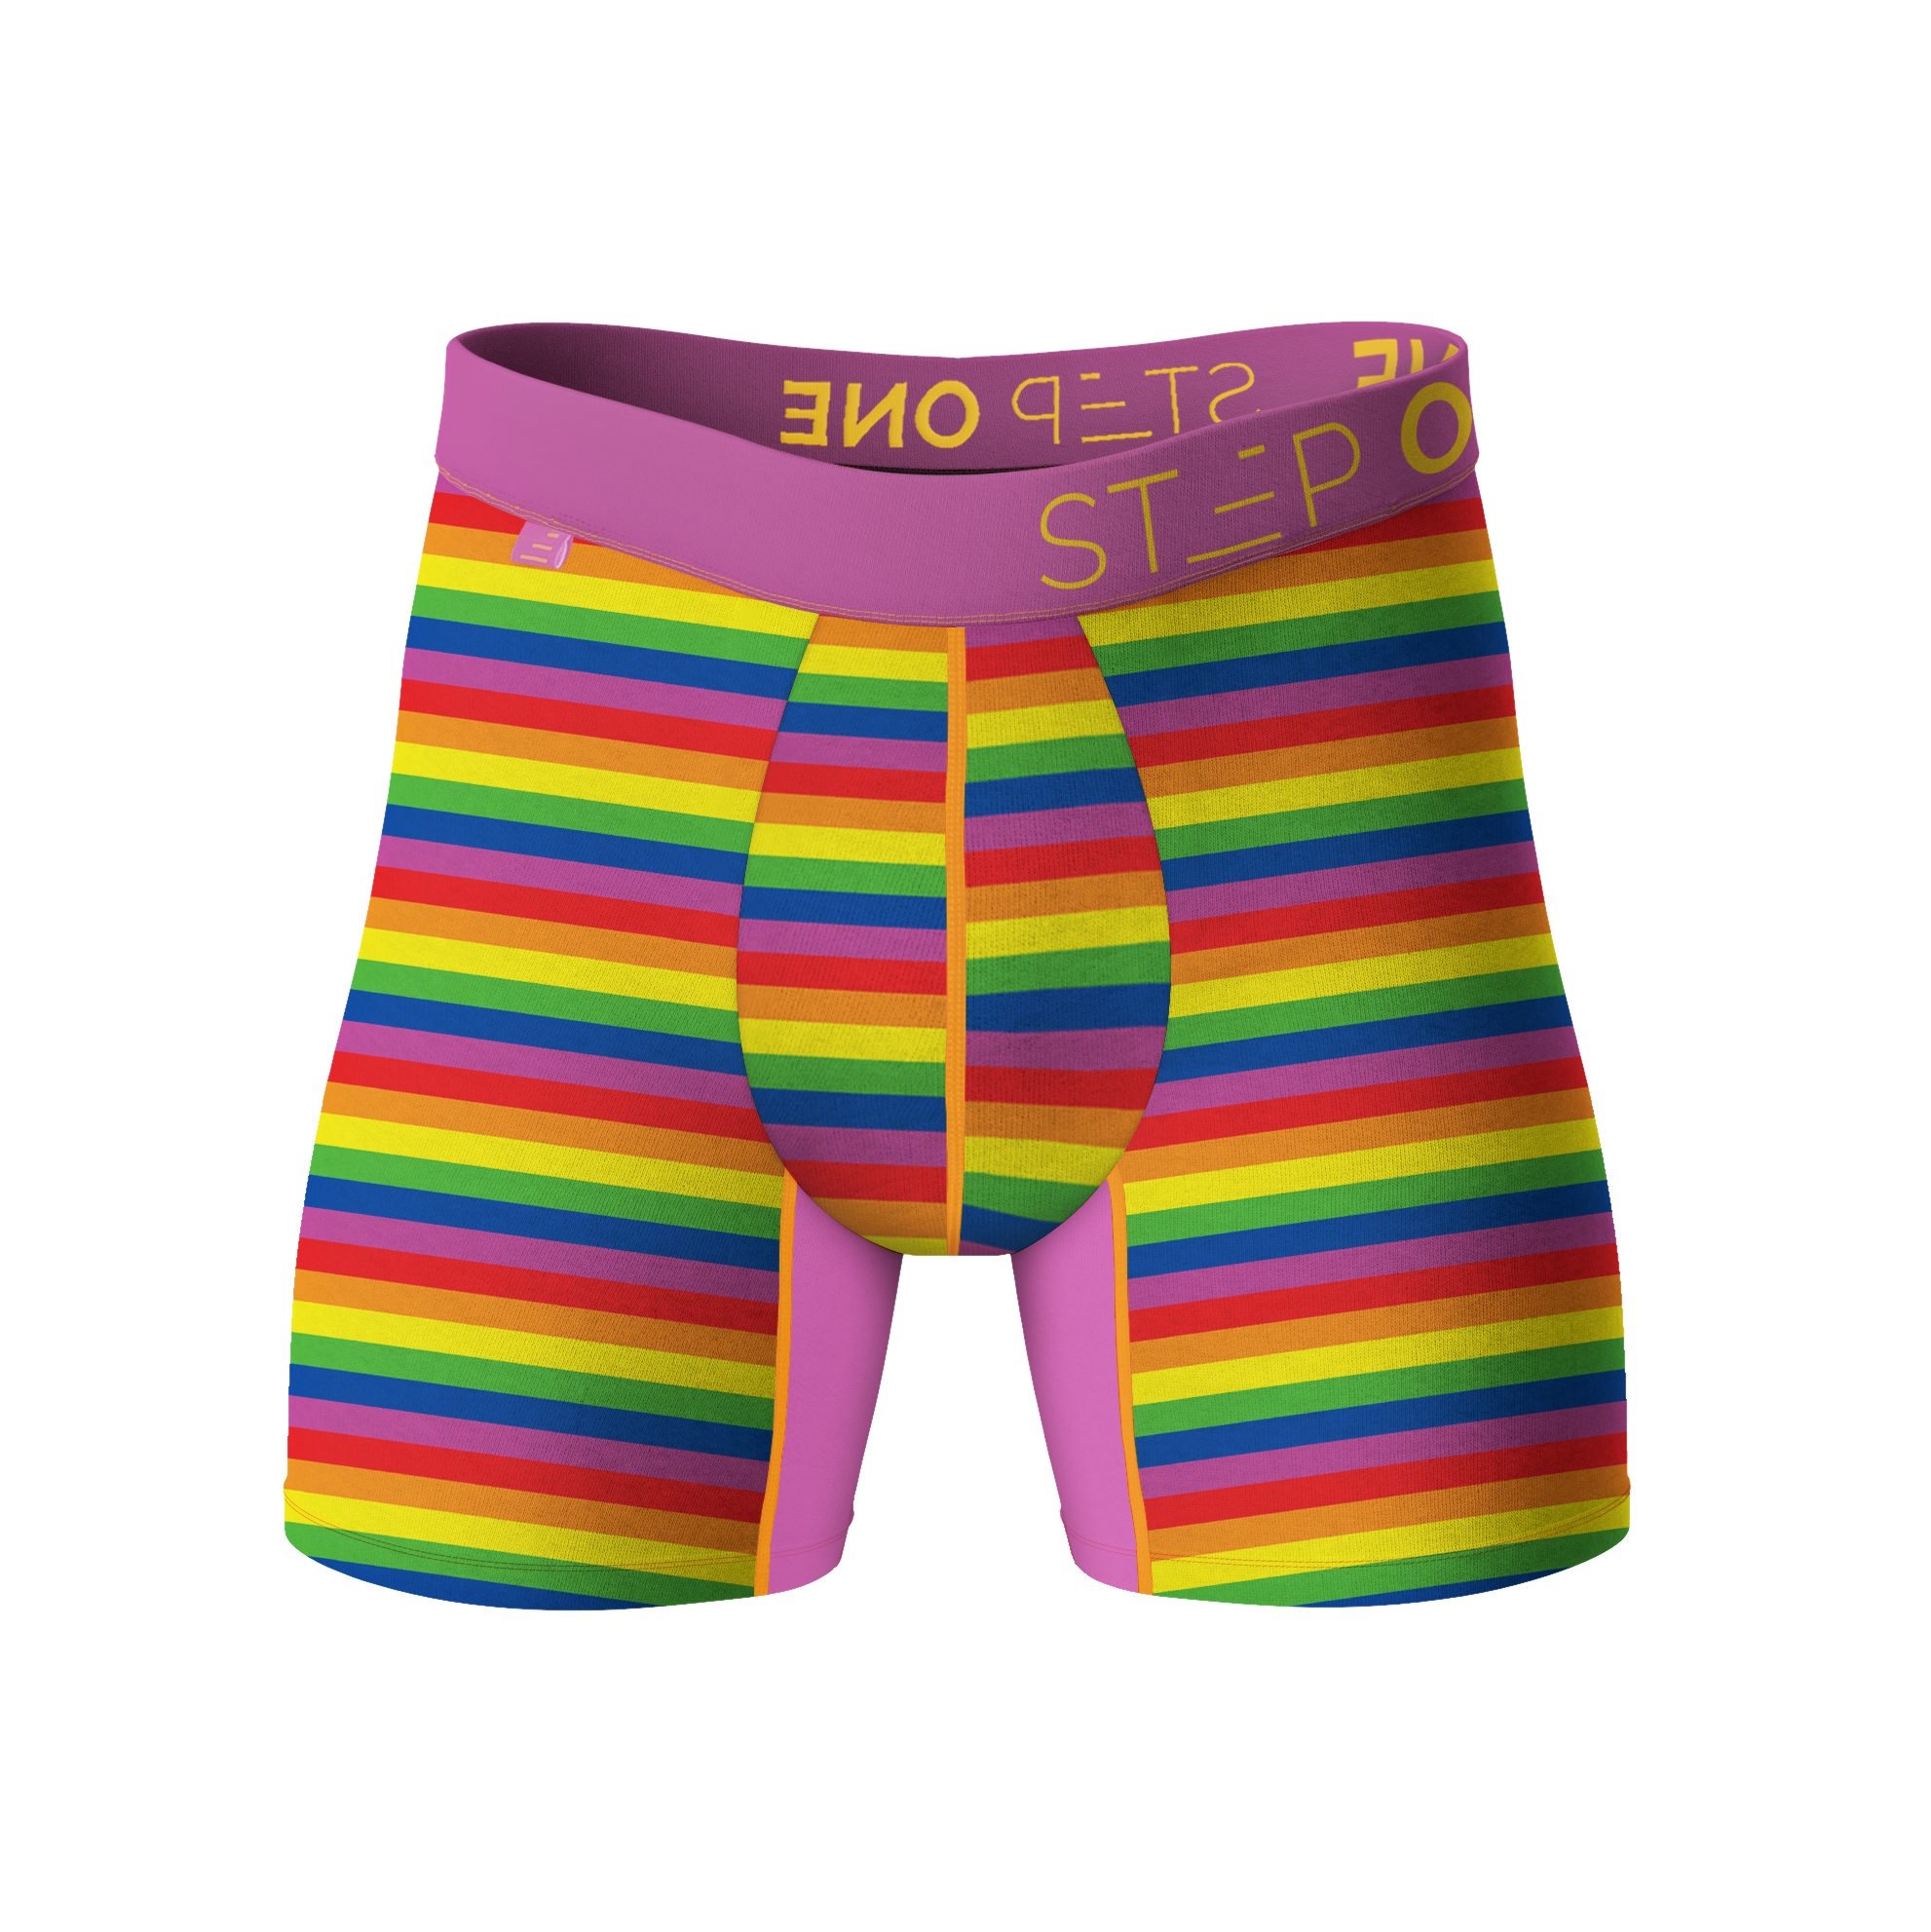 STEP ONE New Mens Boxer Briefs (Longer) Bamboo Underwear- ELECTRO RACERS